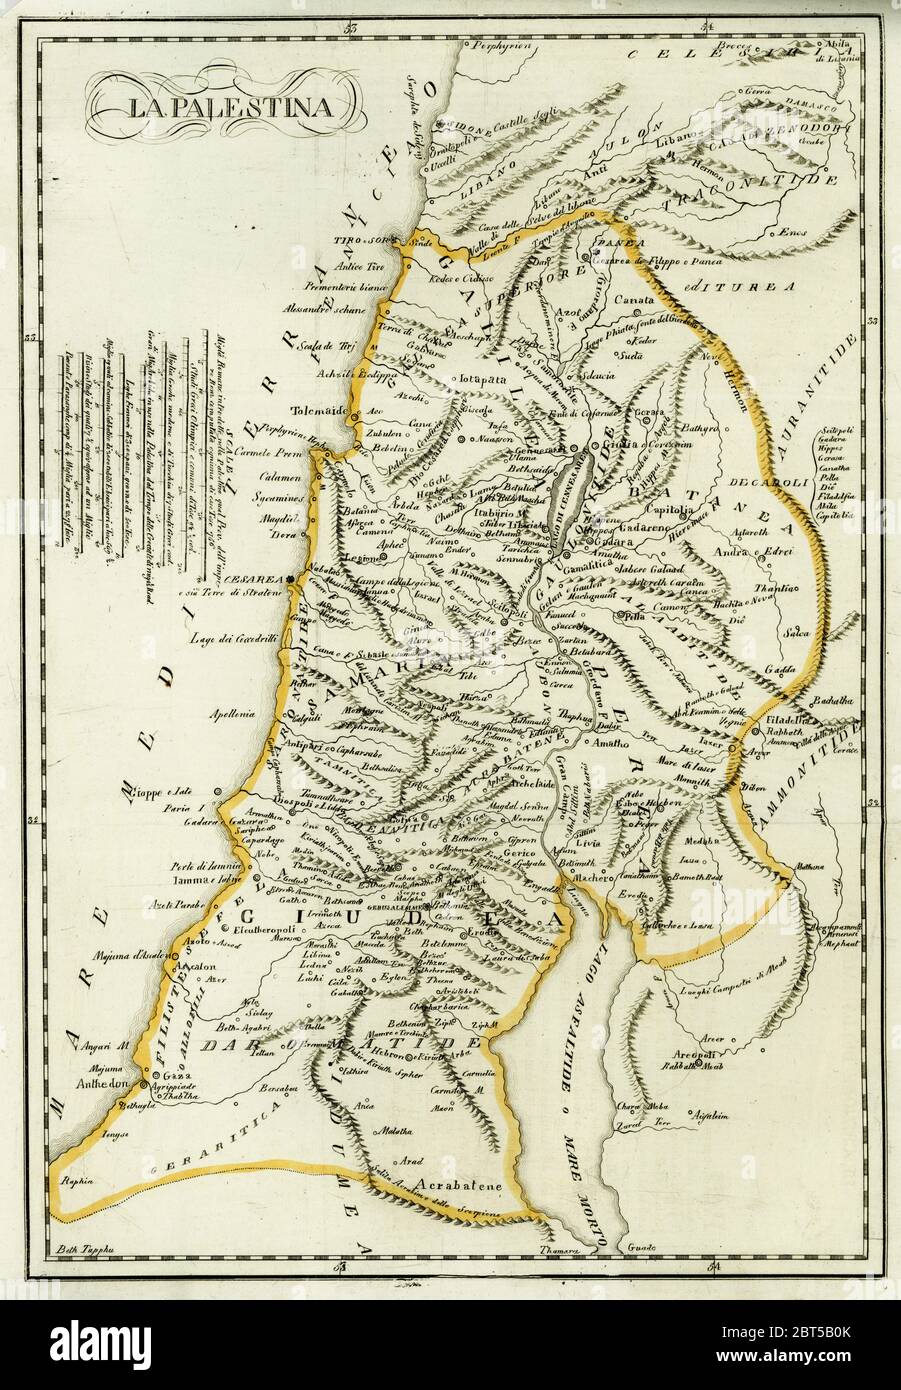 Map of Palestine, circa 1800. From Gaza and Ashkelon in the south to Tyre and Sidon (Lebanon) in the north. La Palestina. Handcoloured copperplate engraving after Giulio Ferrario in his Costumes Ancient and Modern of the Peoples of the World, Il Costume Antico e Modern o Story, Florence, 1833. Stock Photo